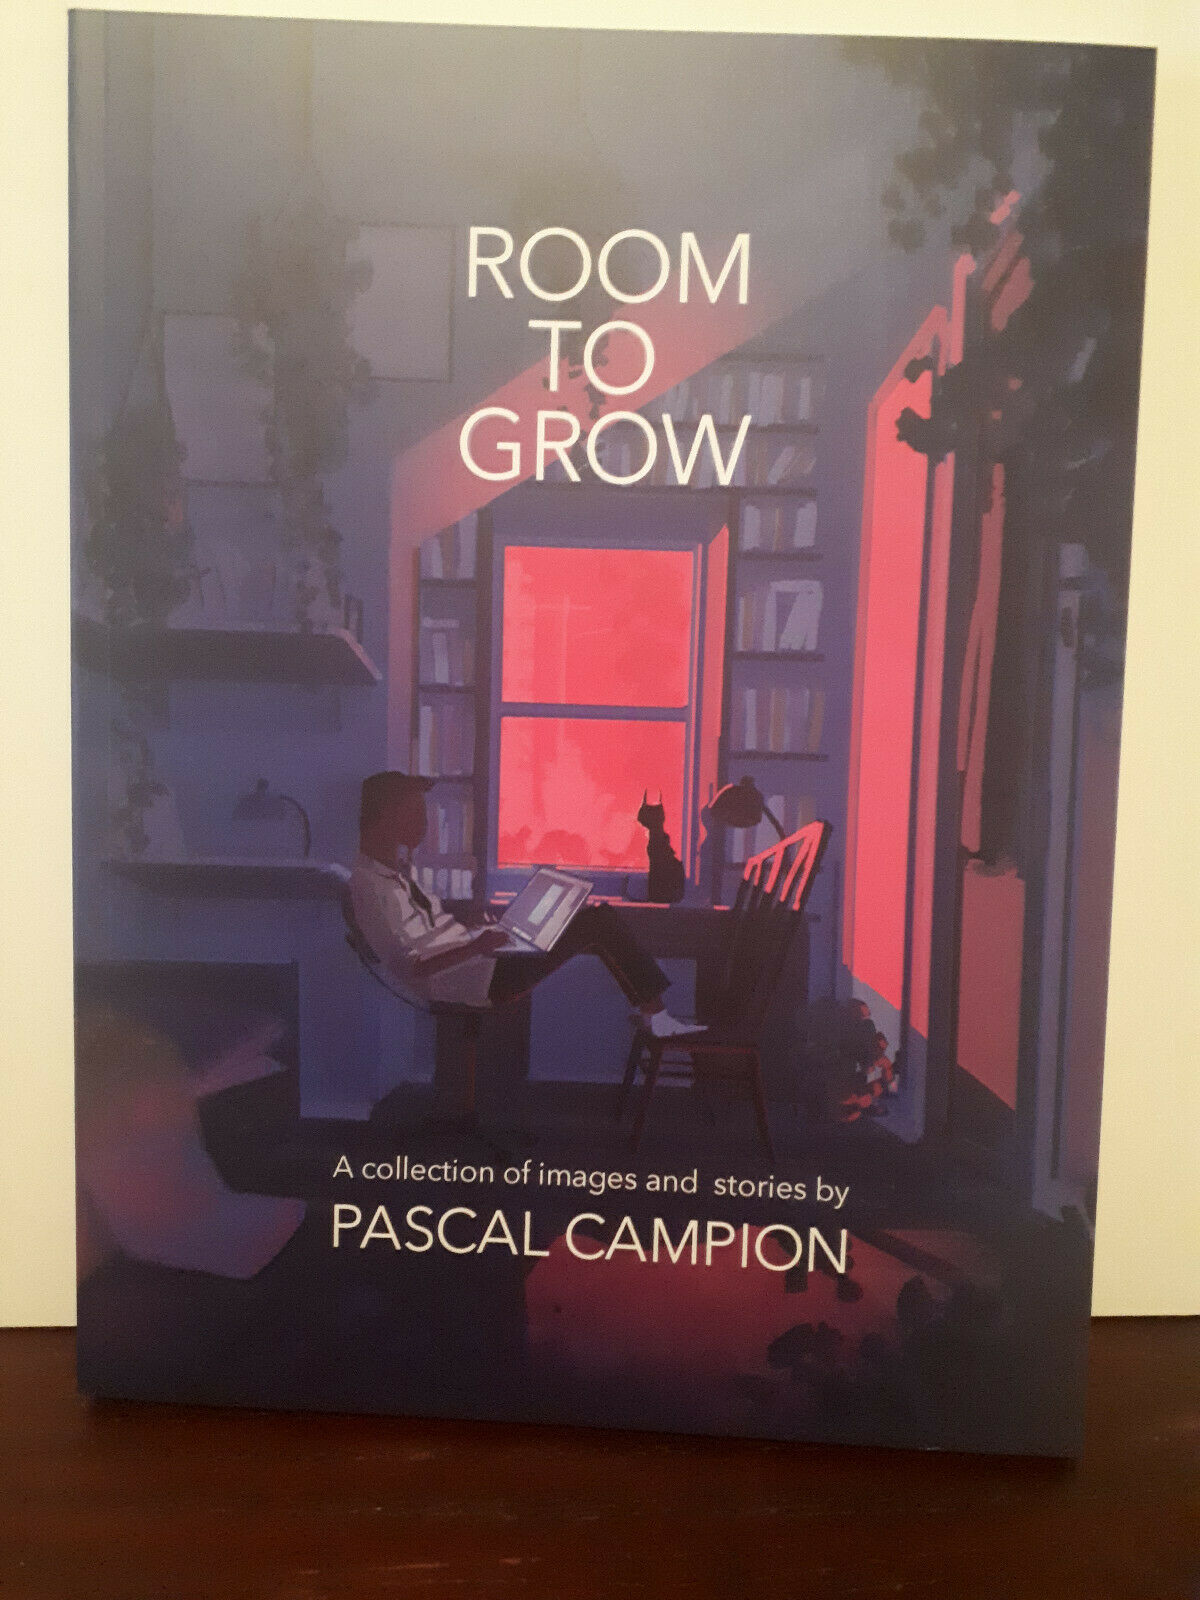 The Art of Pascal Campion - (Hardcover)